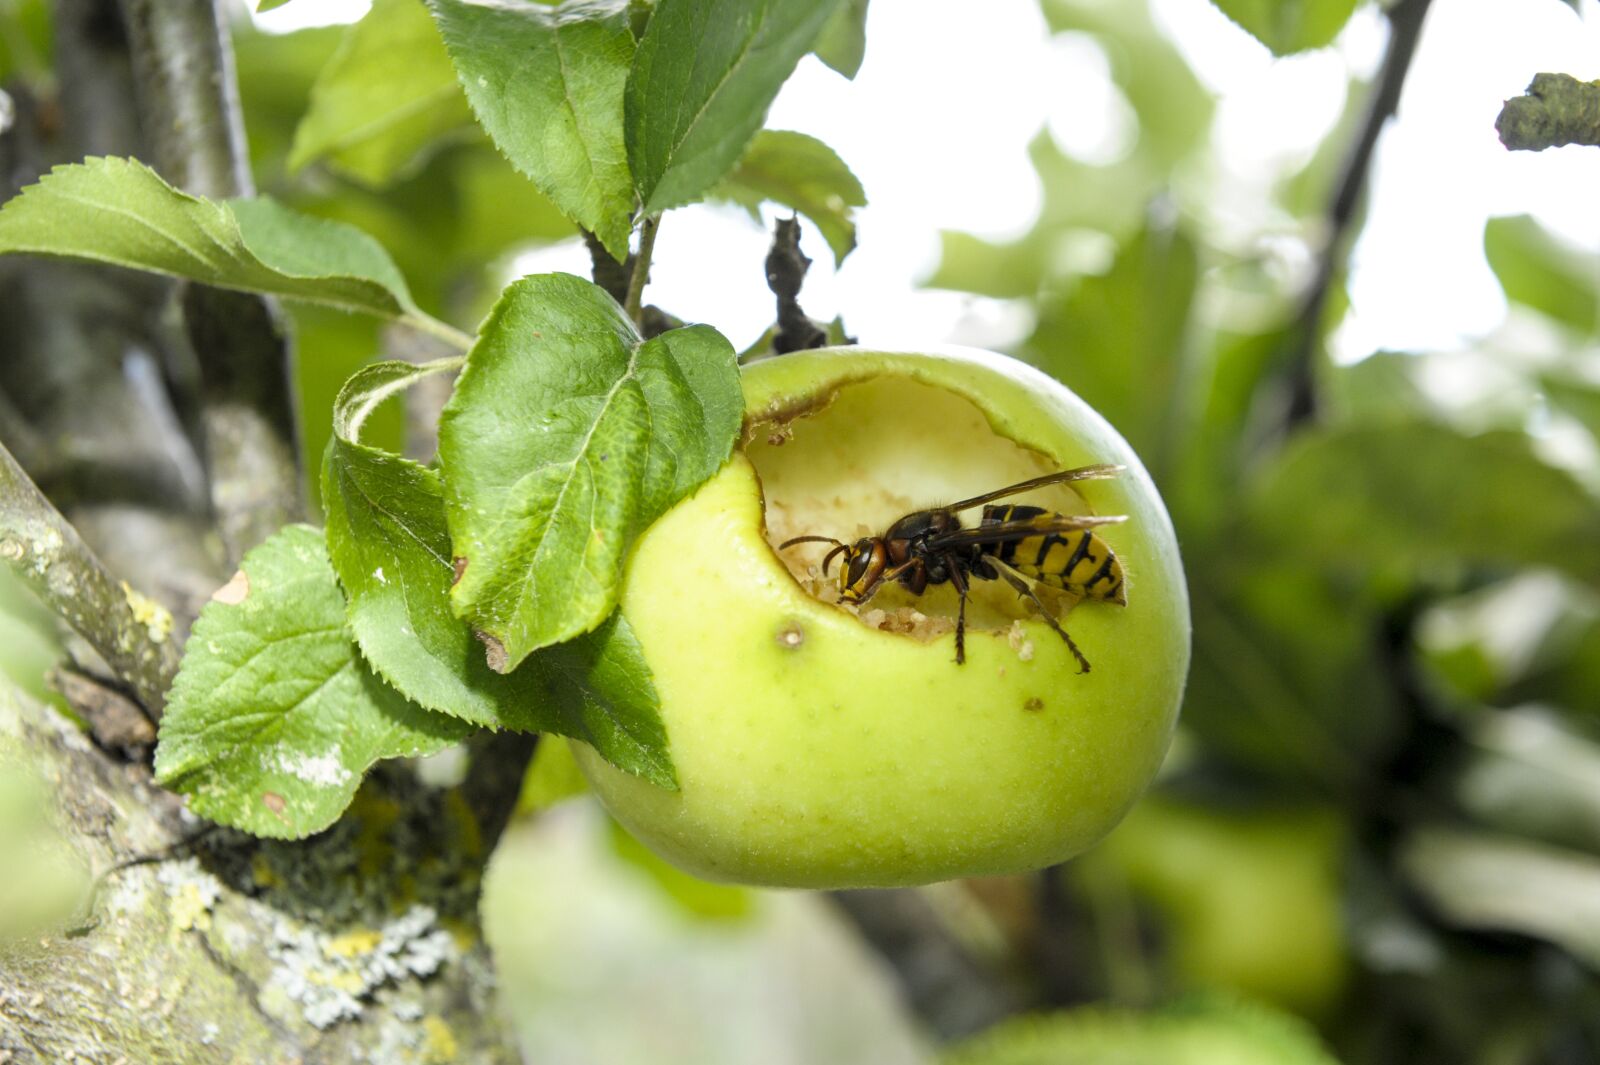 Nikon D3 sample photo. Insect, apple, close up photography